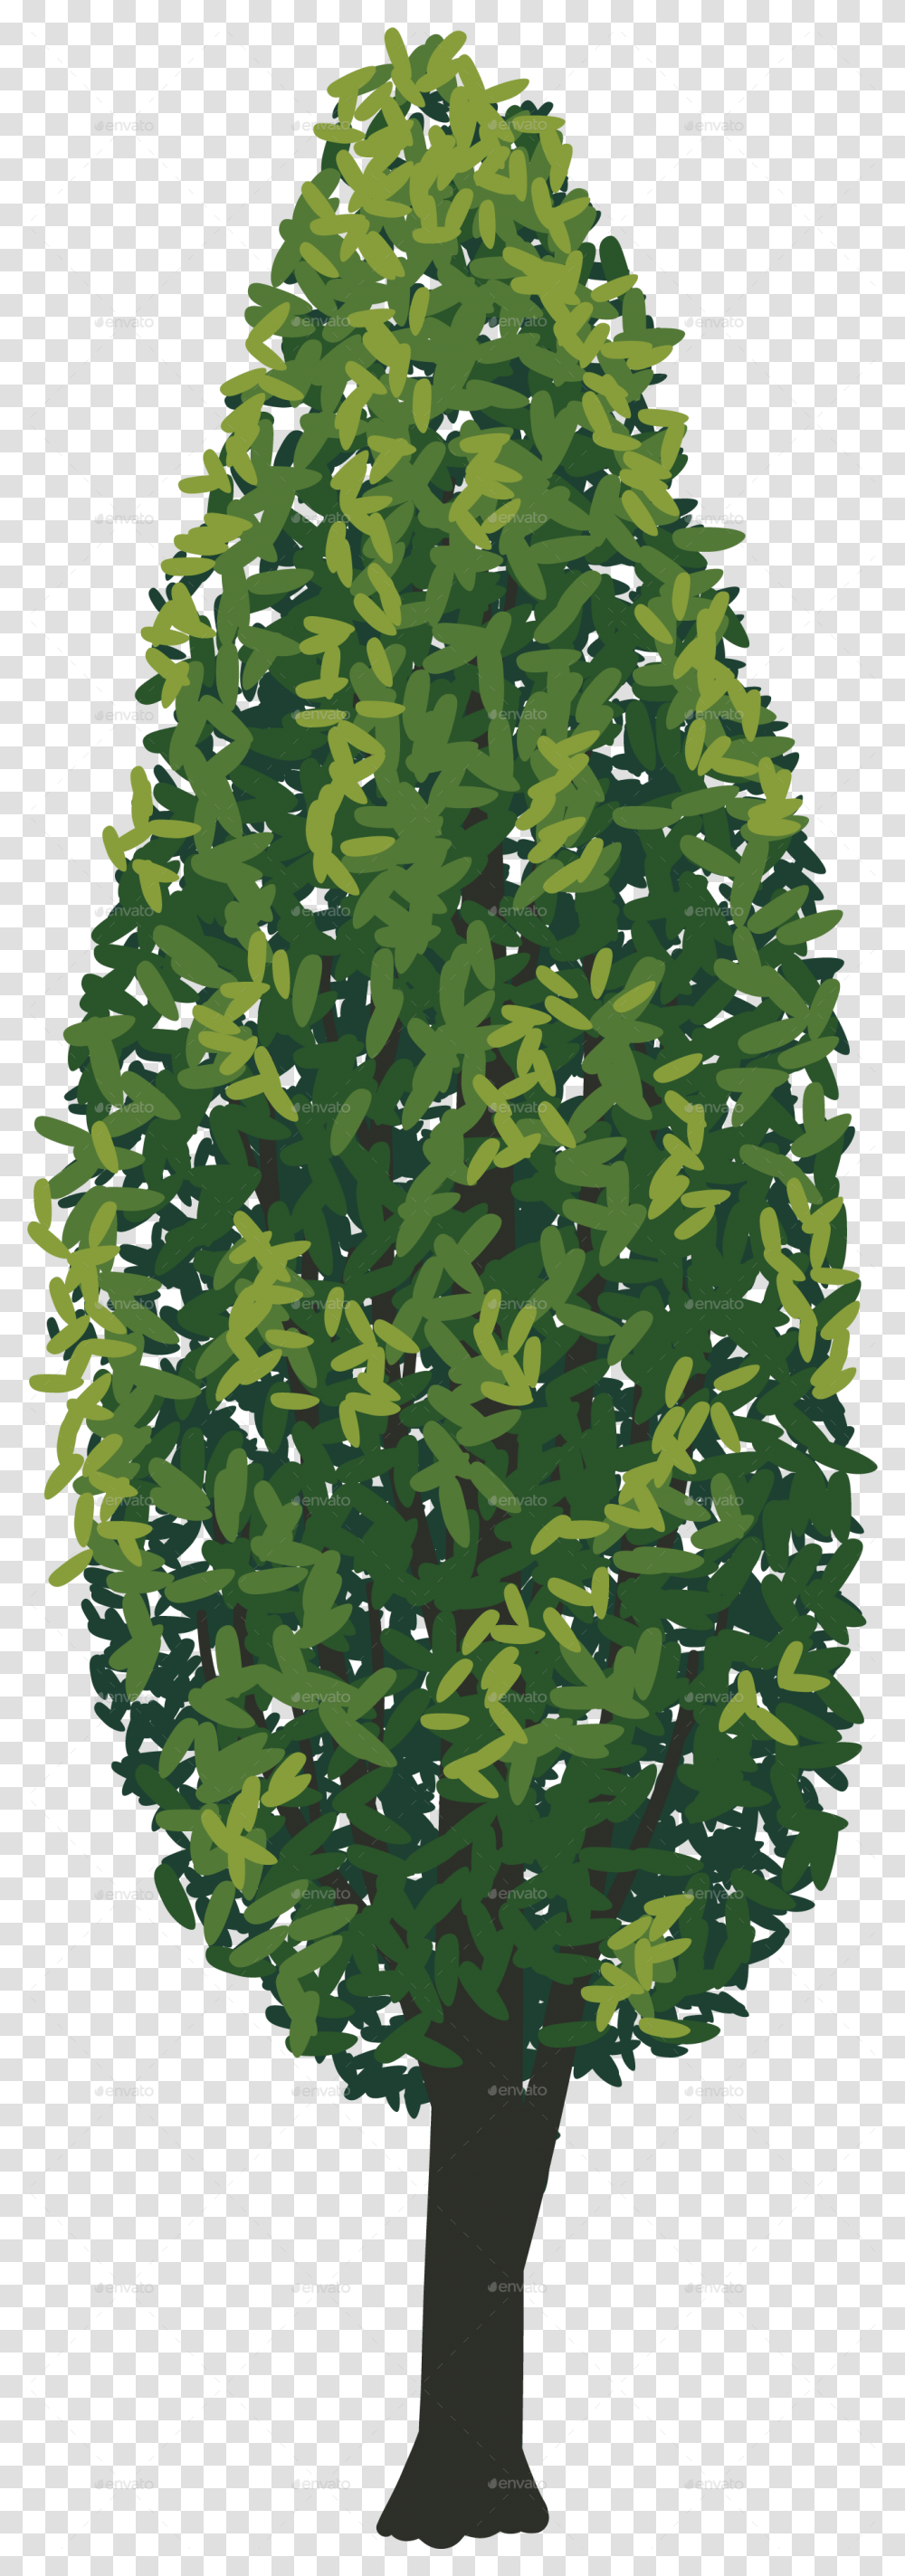 Gambel Oak, Military, Military Uniform, Camouflage, Pineapple Transparent Png